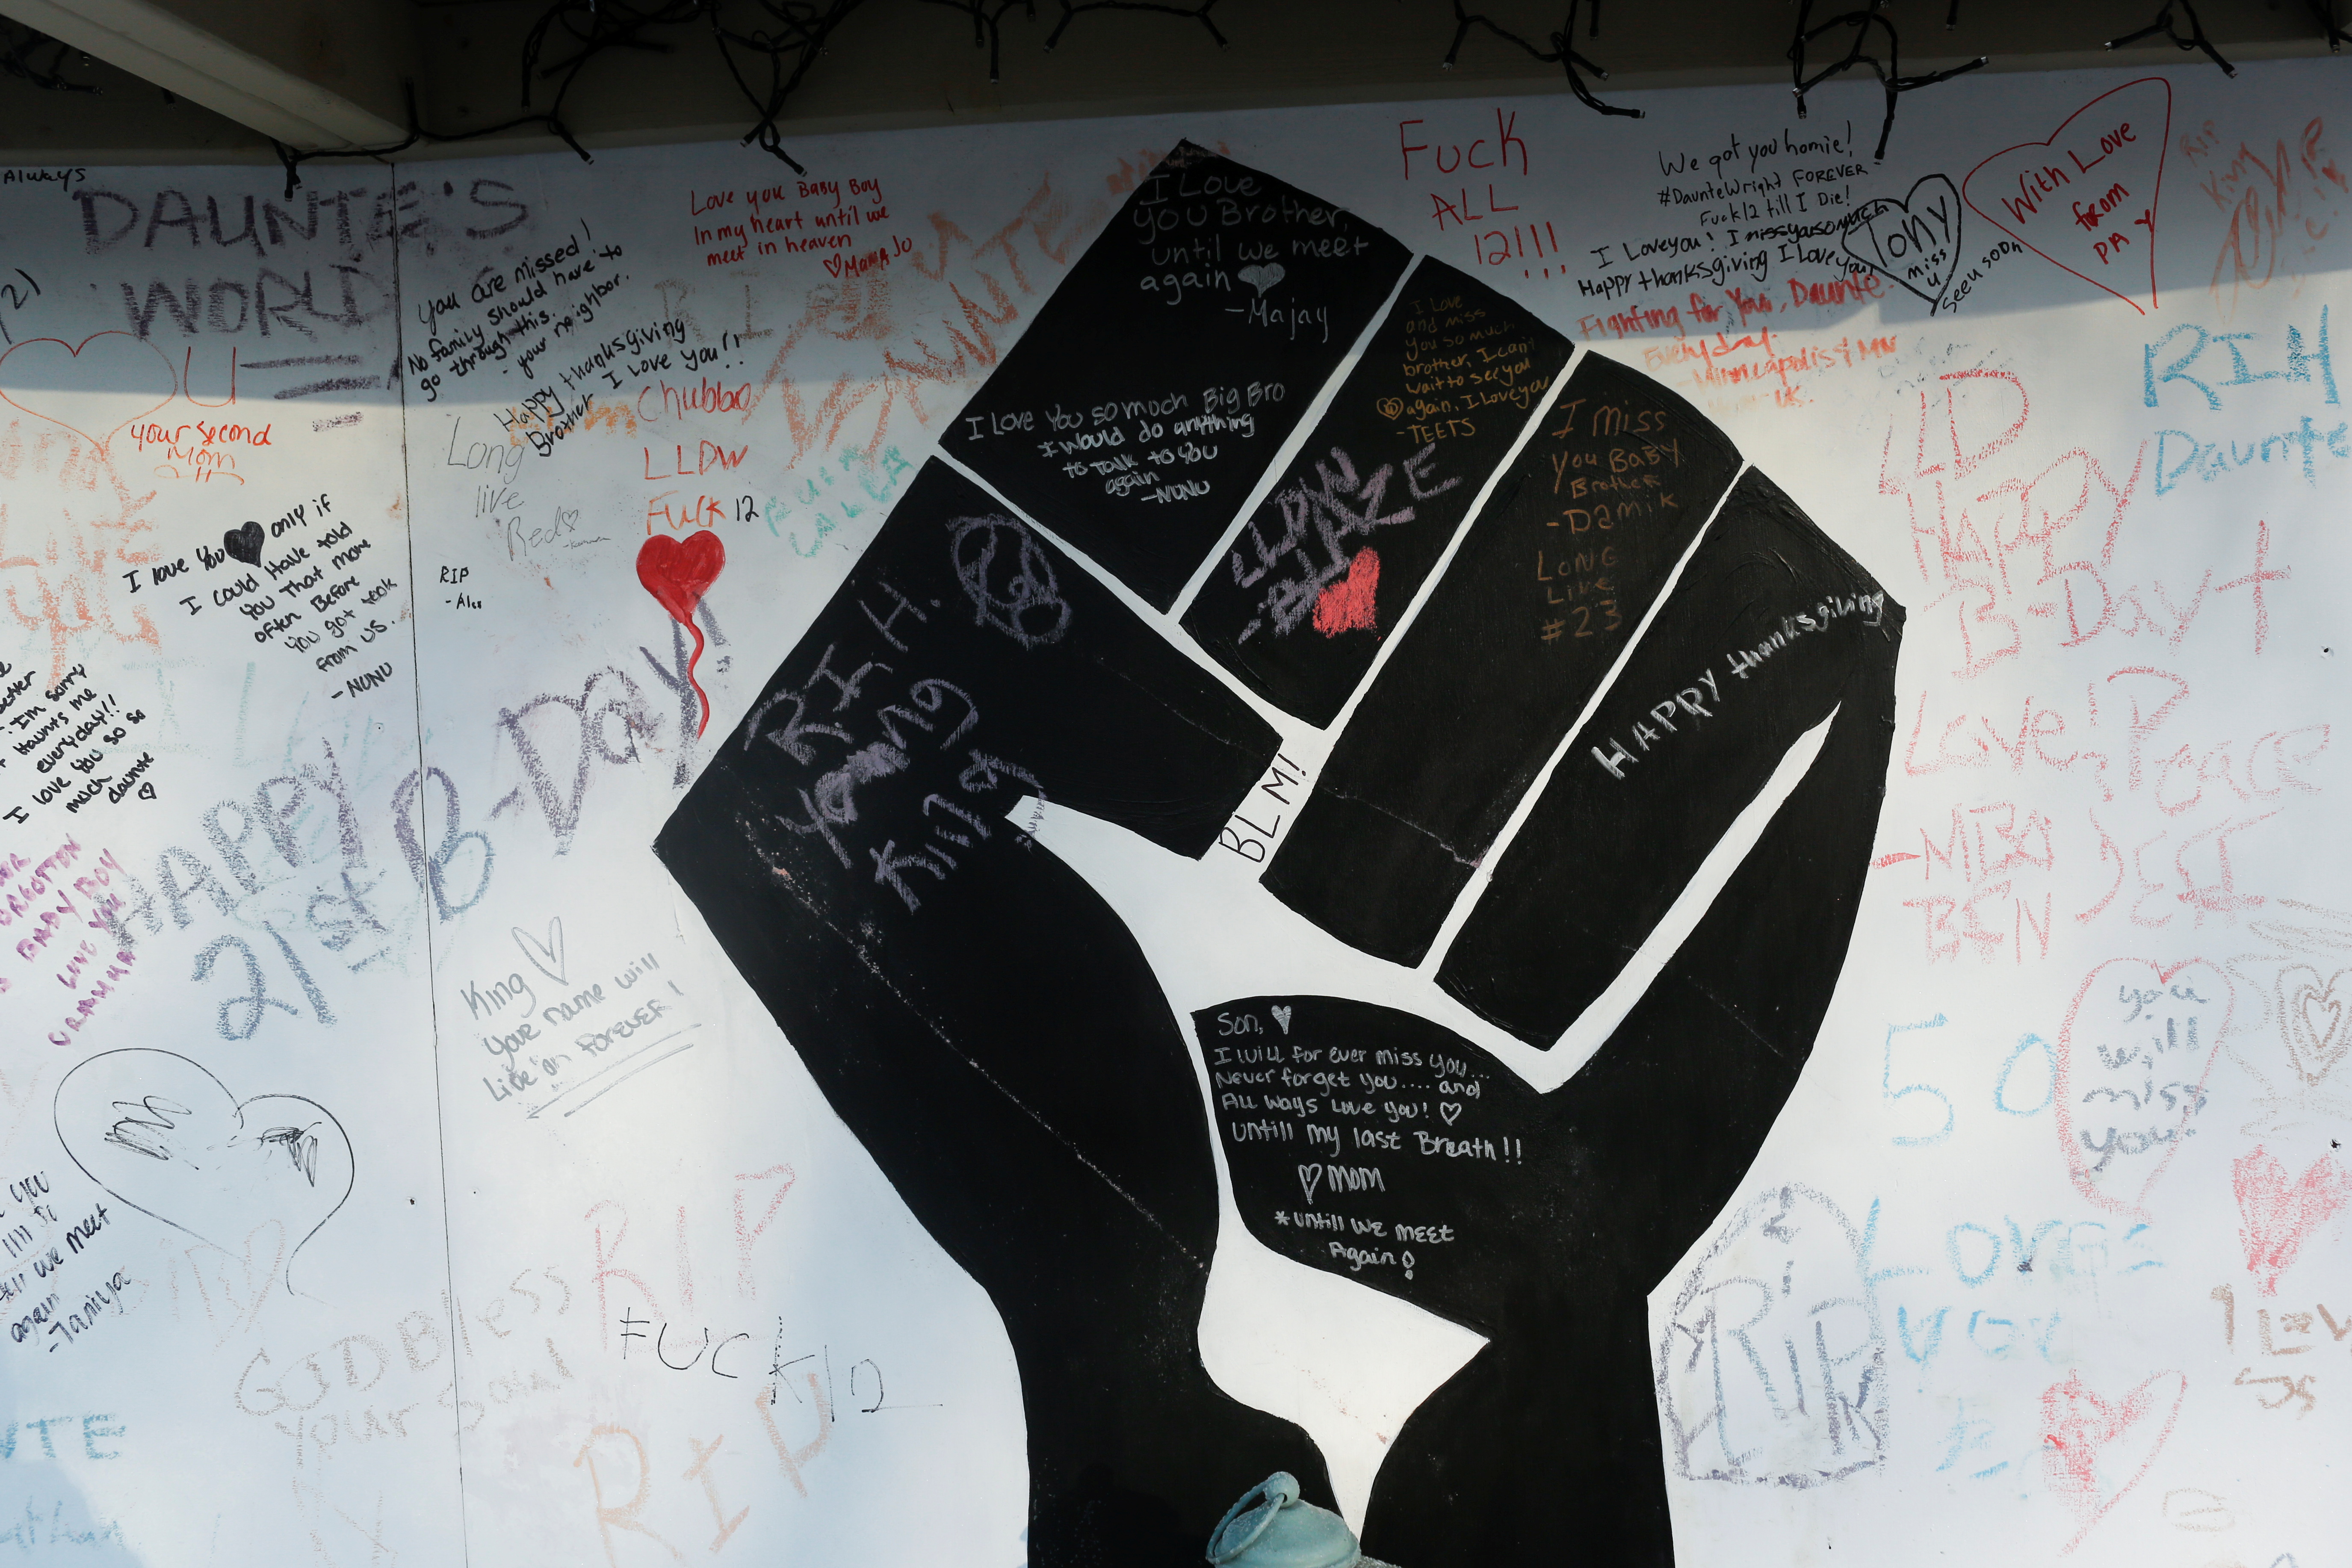 SENSITIVE MATERIAL. THIS IMAGE MAY OFFEND OR DISTURB Notes from Daunte Wright’s family and friends are written on memorial art at the site where Daunte Wright was killed as opening statements are set to begin in the manslaughter trial of Kimberly Potter, a white former Minnesota police officer charged in the fatal shooting of Daunte Wright, a Black man whose April death sparked protests, in Minneapolis, Minnesota, U.S., December 8, 2021. REUTERS/Nicole Neri